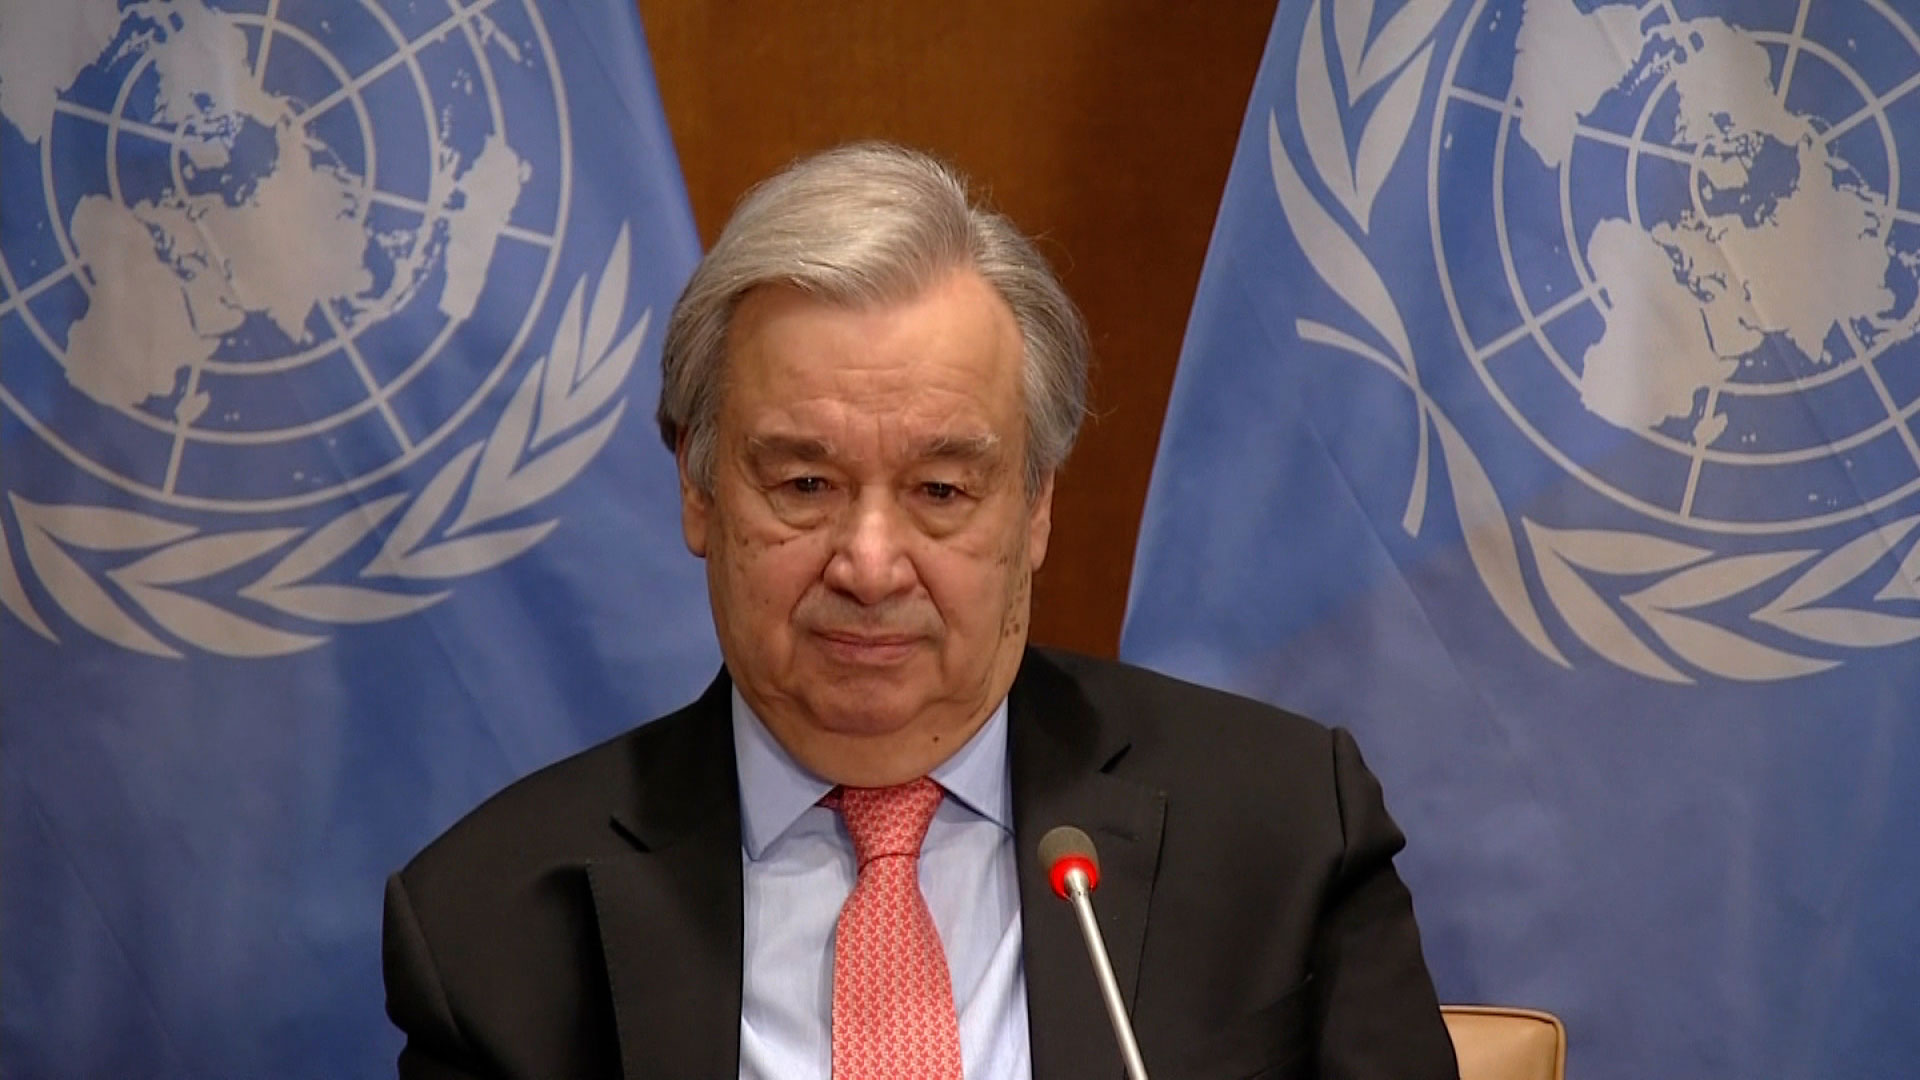 UN Secretary General António Guterres speaks via video during the Munich Security Conference on February 19.